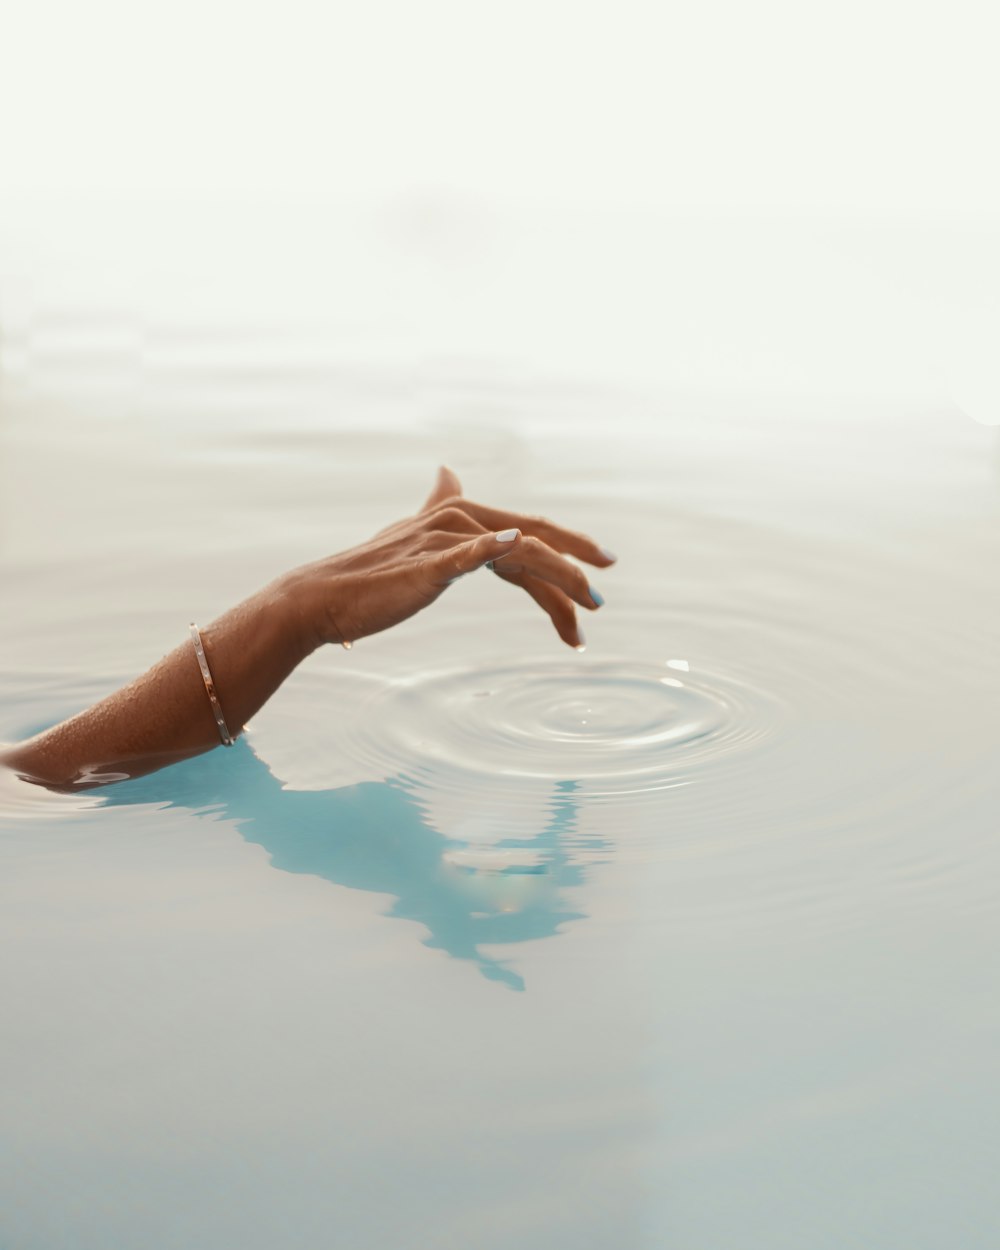 a person's hand reaching for something in the water